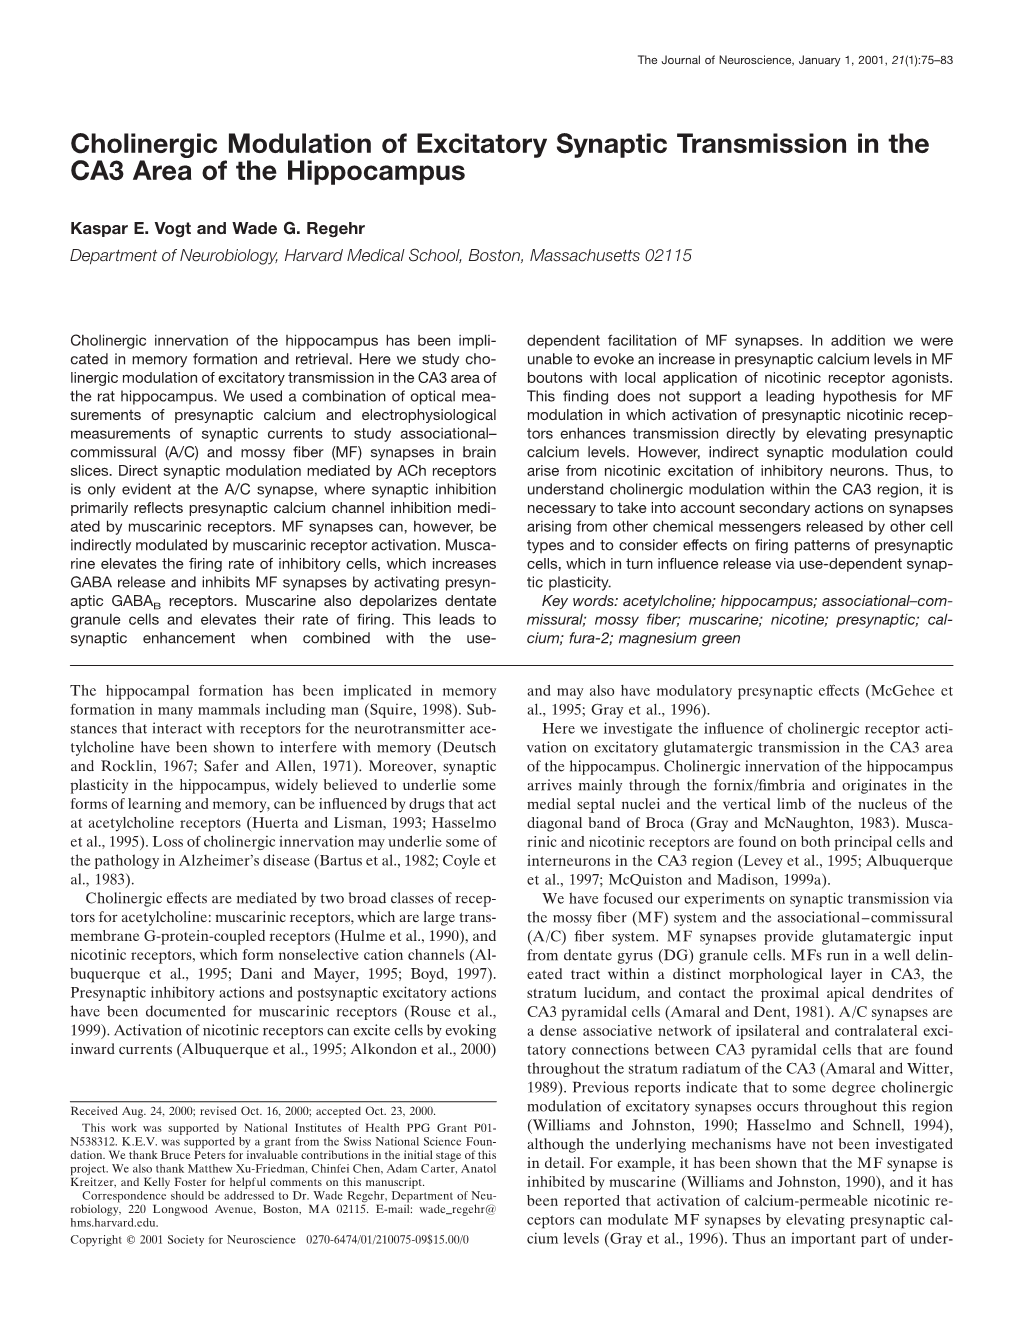 Cholinergic Modulation of Excitatory Synaptic Transmission in the CA3 Area of the Hippocampus